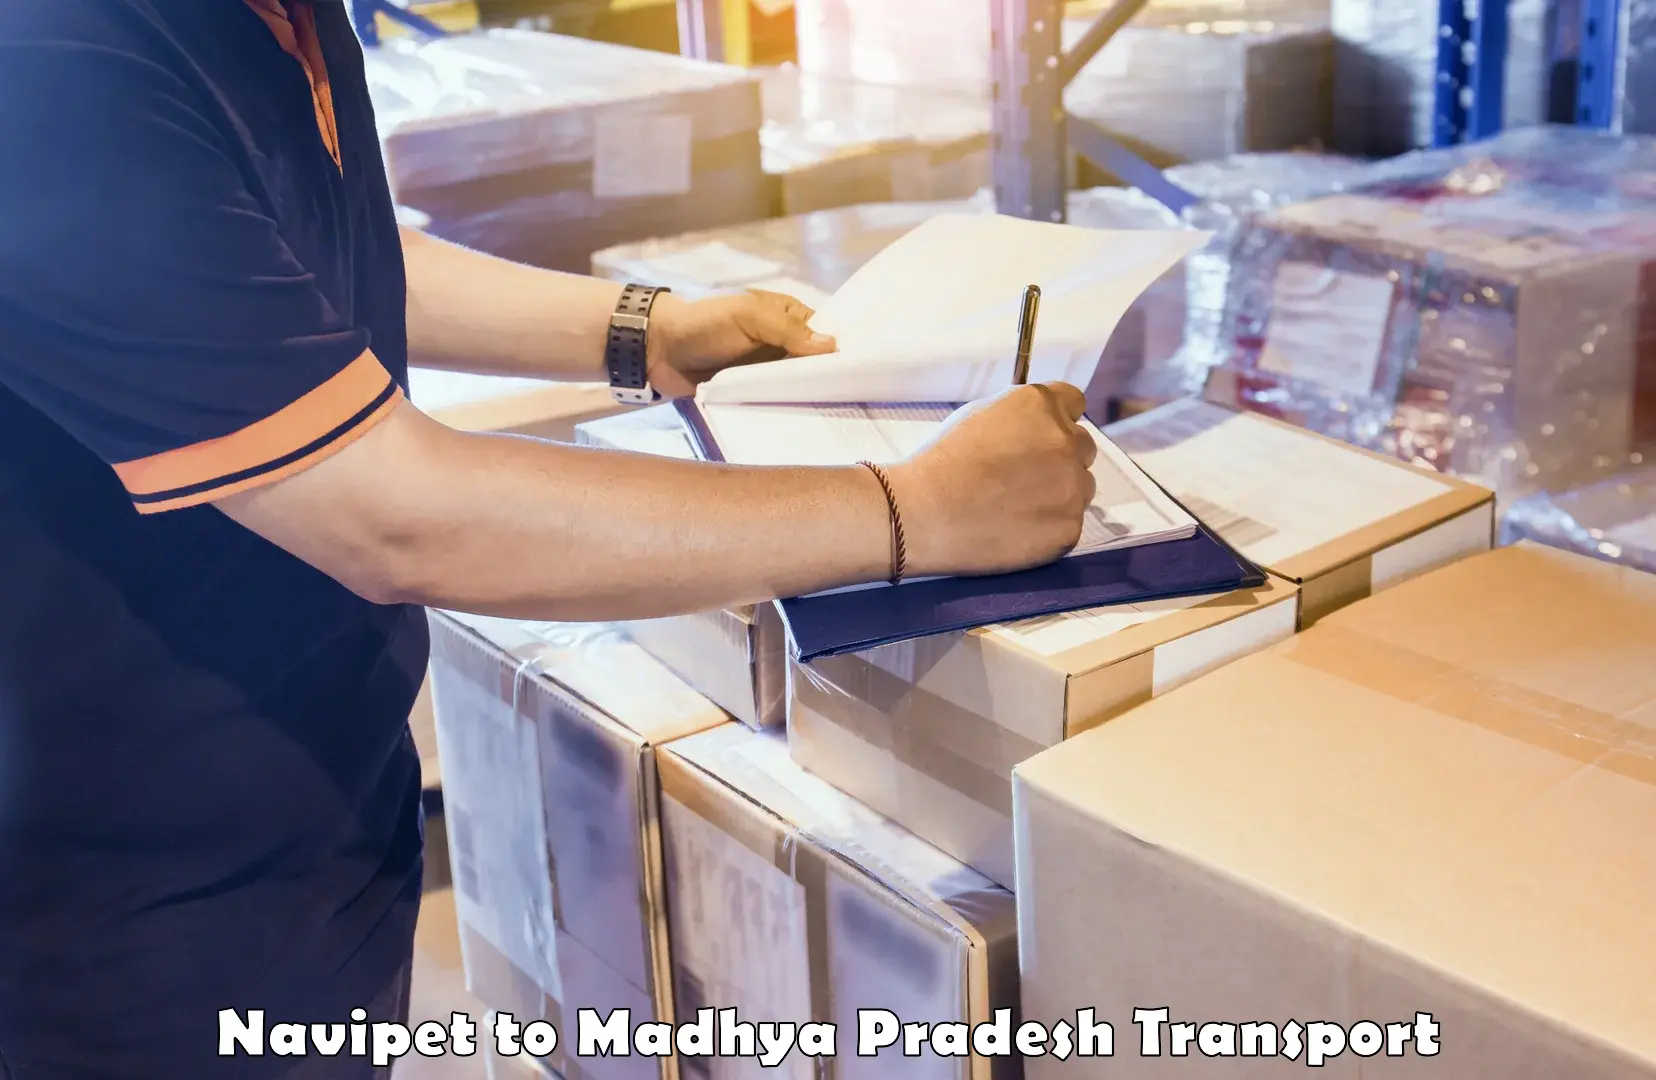 Truck transport companies in India Navipet to IIIT Bhopal